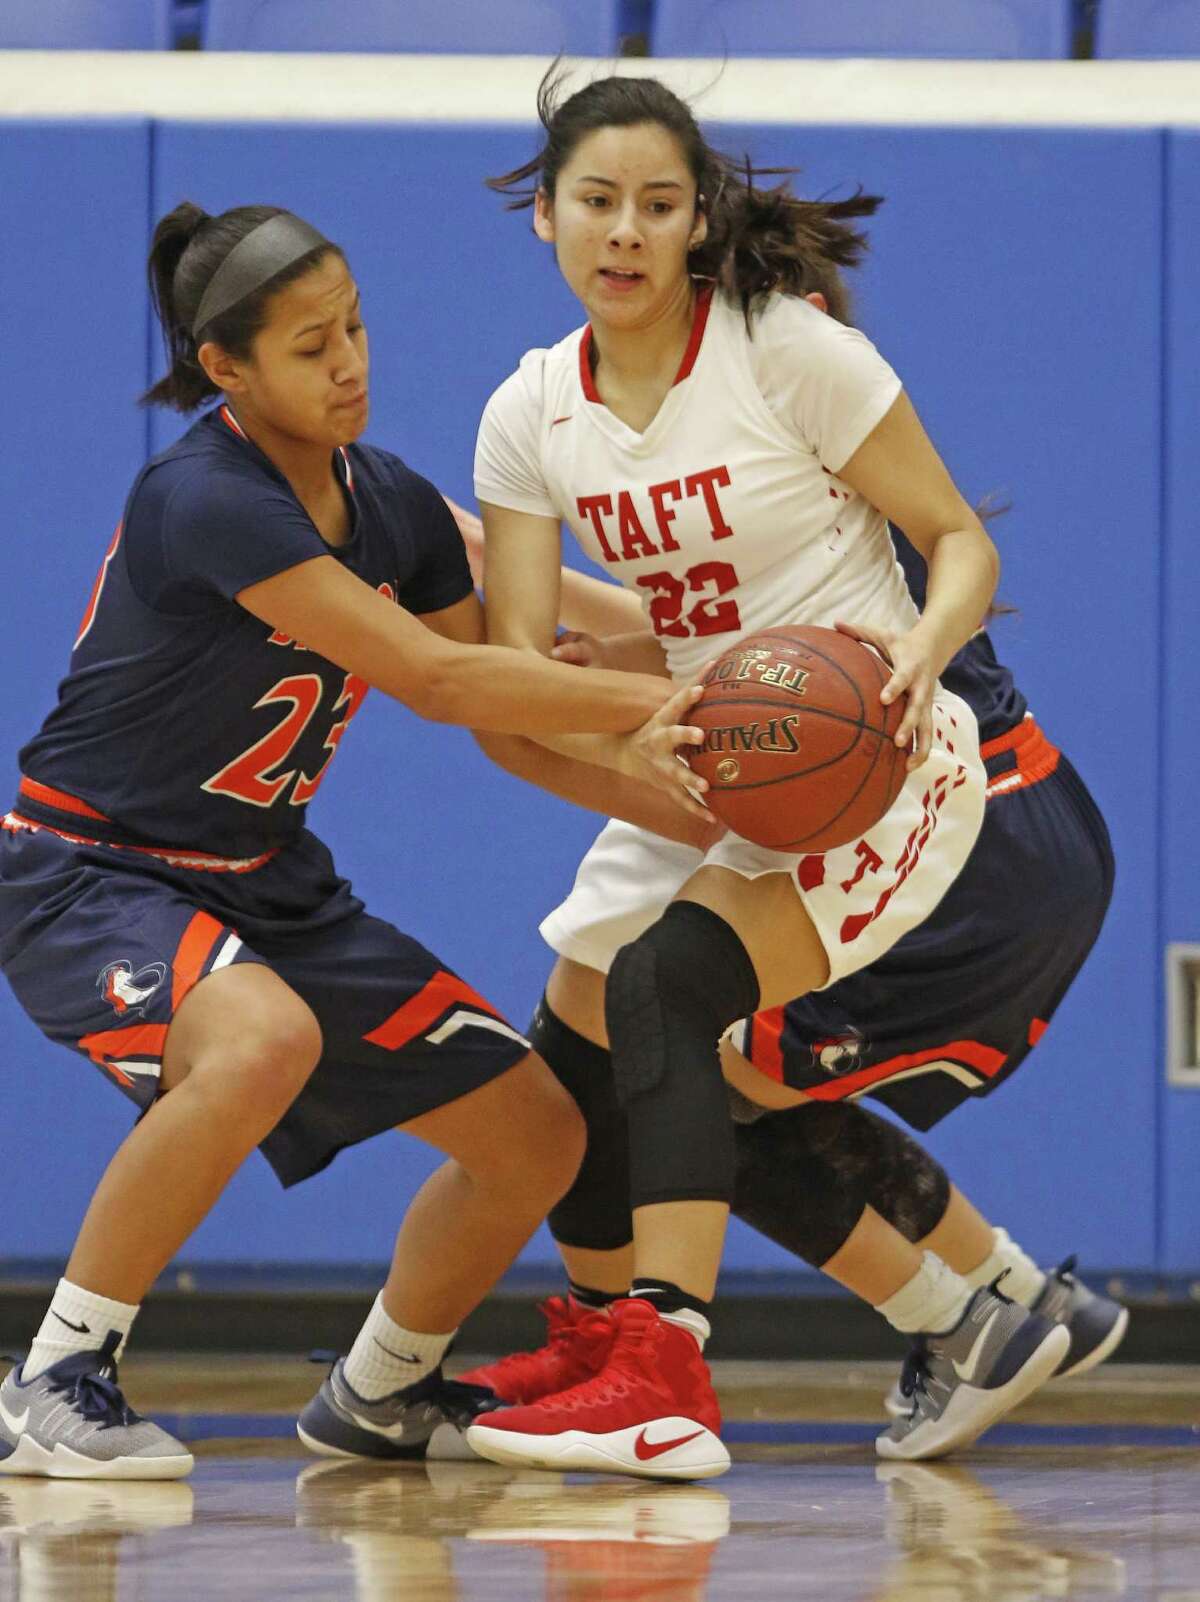 Brandeis?•s Ariana Villa tries to tie up Taft?•s Brianna Cuellar in the District 28-6A girls basketball game on Saturday, January 14, 2017 at Northside ISD Gym.